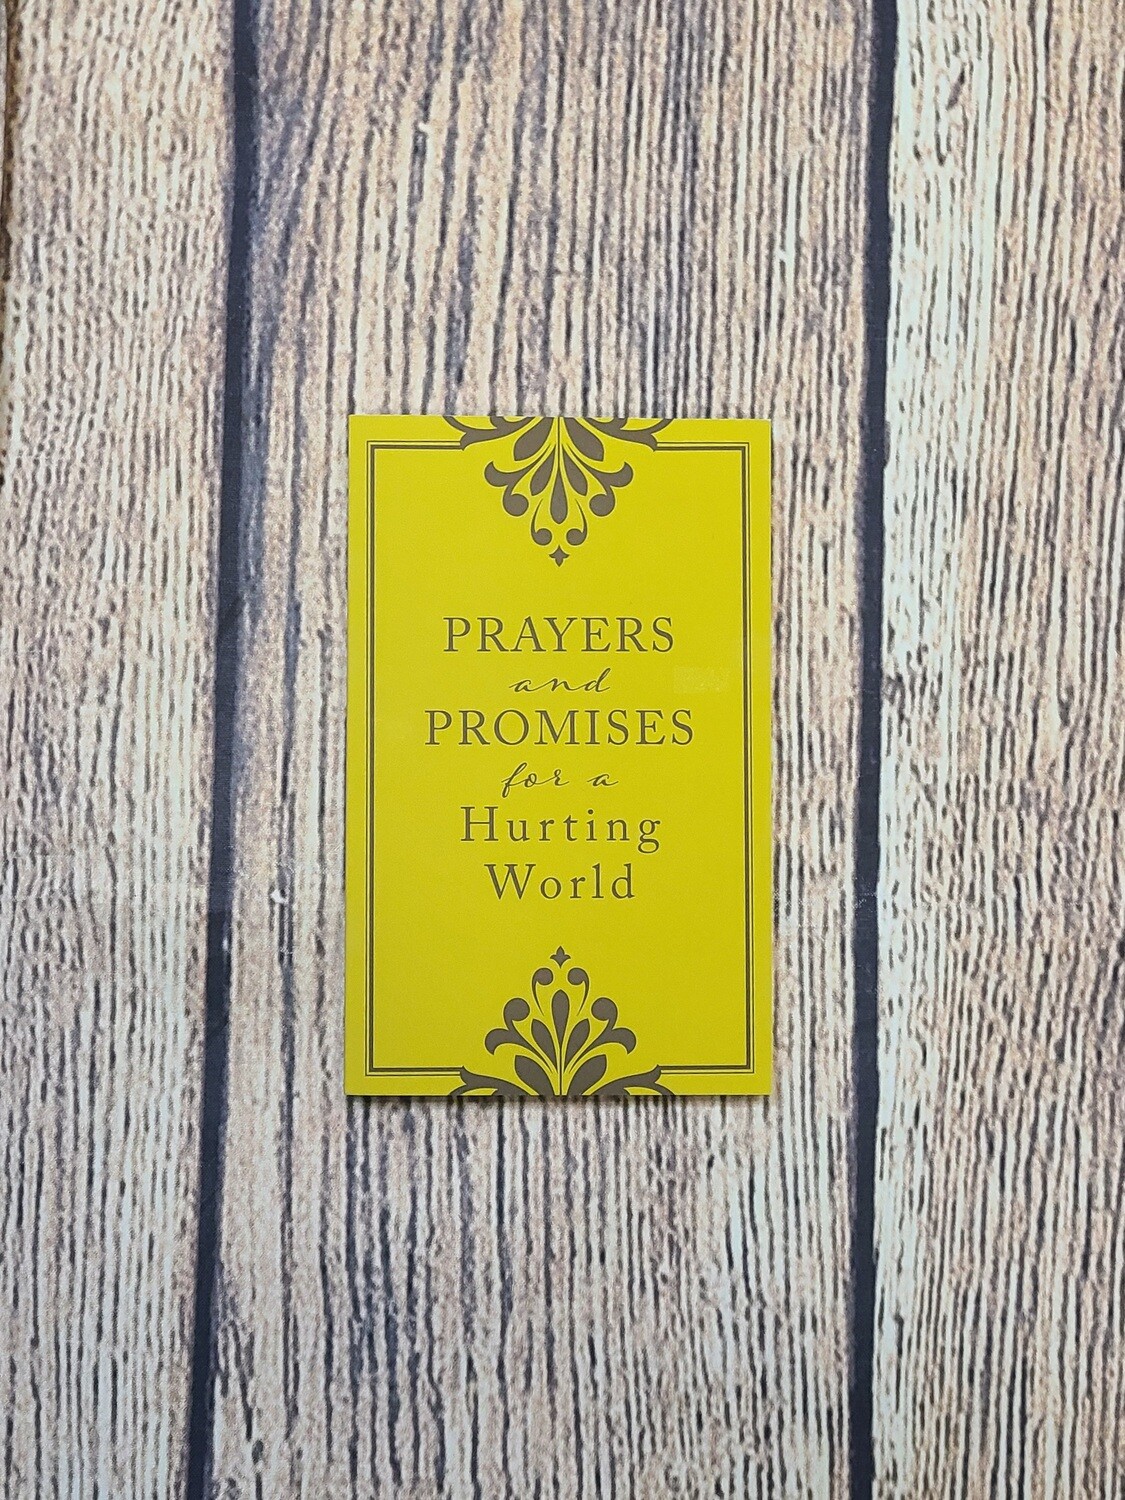 Prayers and Promises for a Hurting World by Laura Freudig